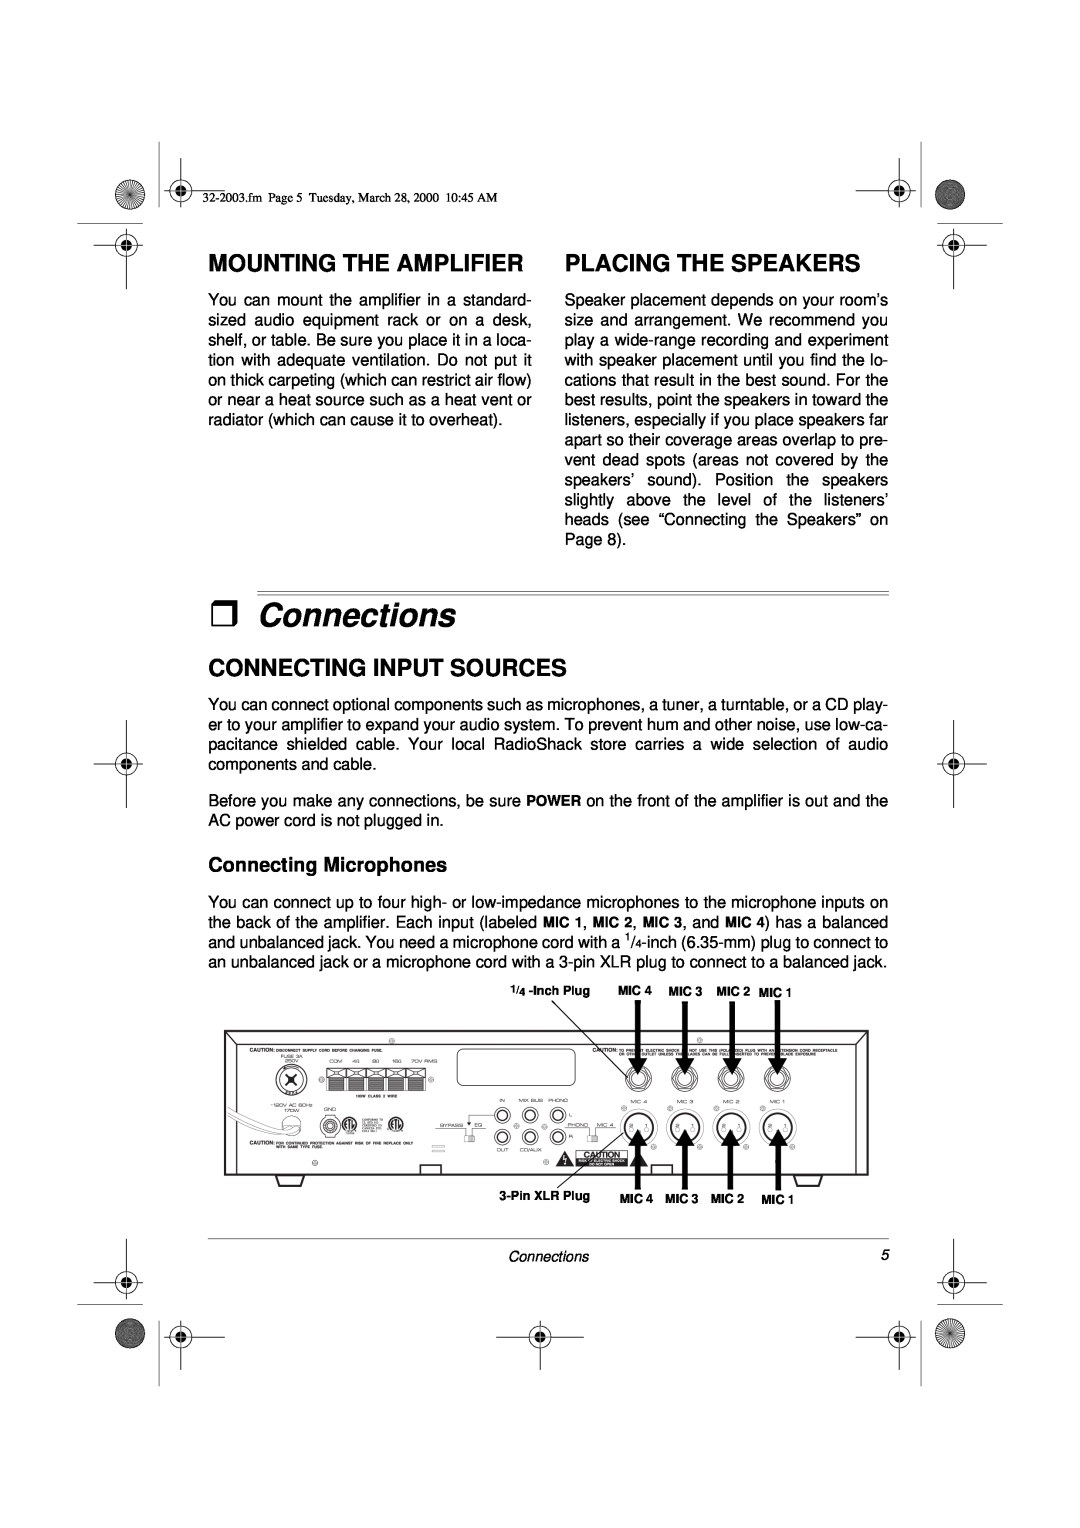 Radio Shack MPA-125 owner manual ˆConnections, Mounting The Amplifier, Placing The Speakers, Connecting Input Sources 